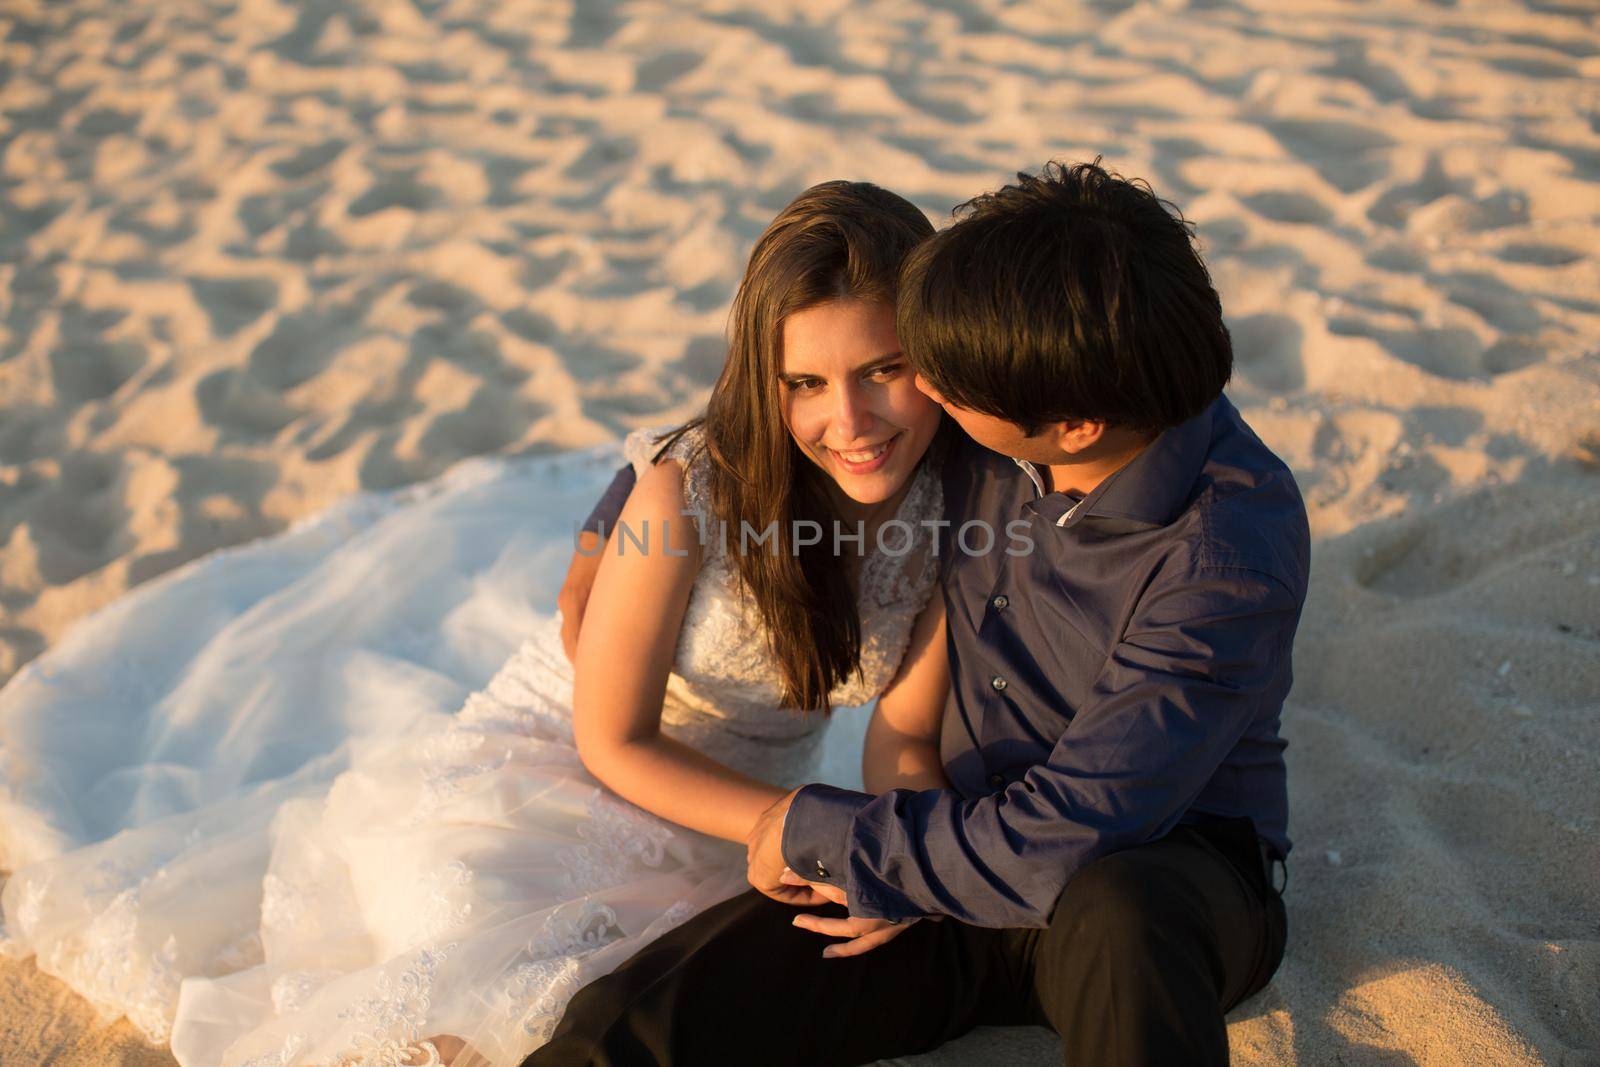 bride and groom sit on the sand